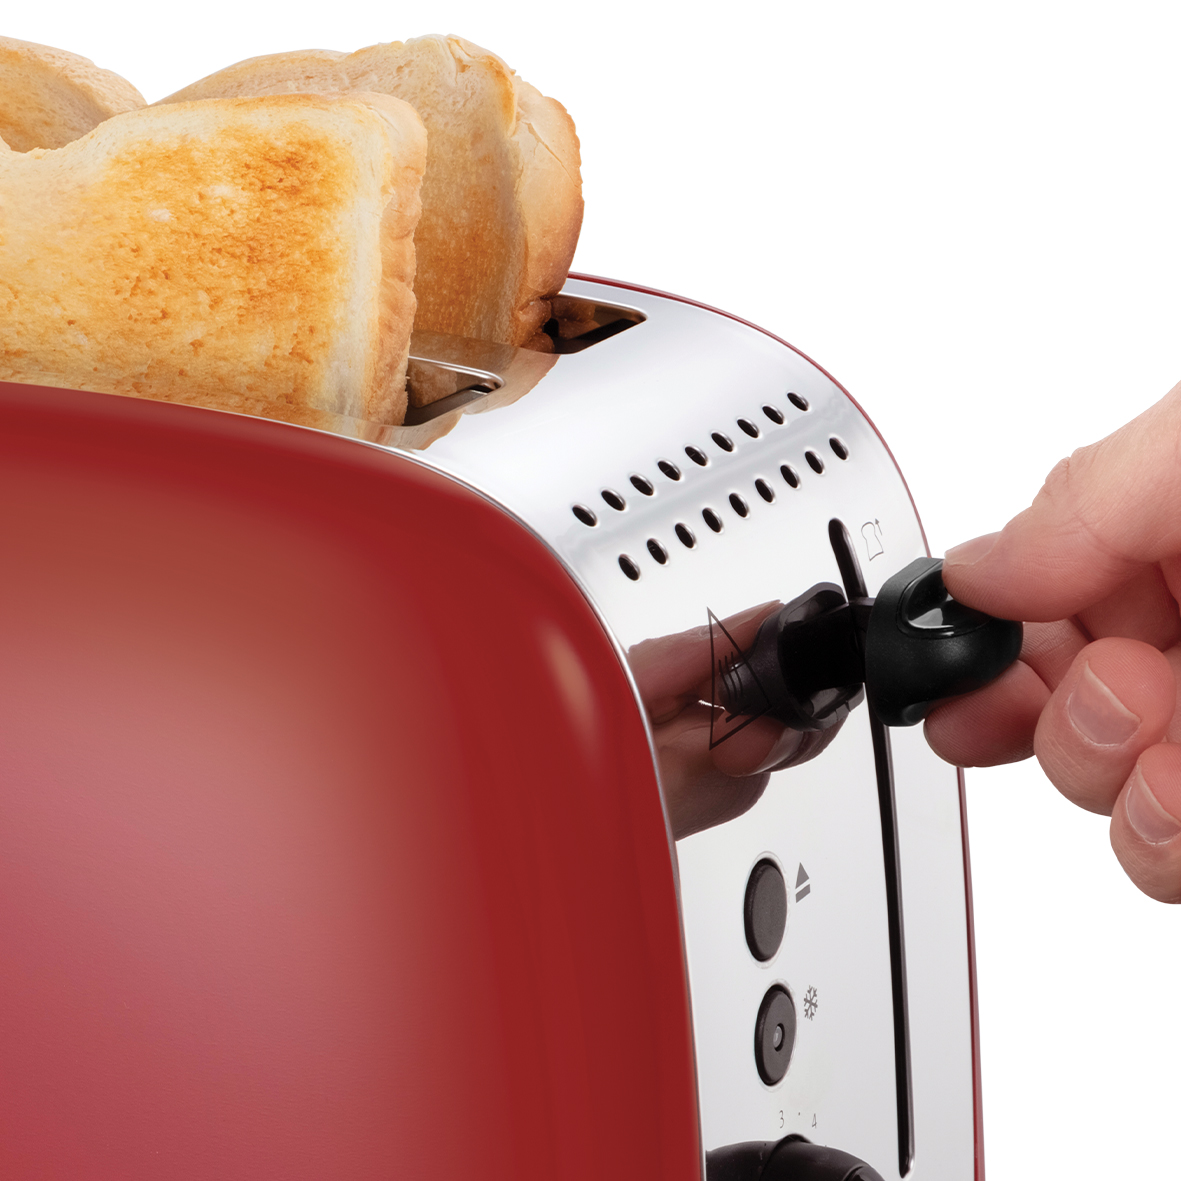 Russell Hobbs_Colours Plus Toaster_Flame Red_59,99 Euro (4)